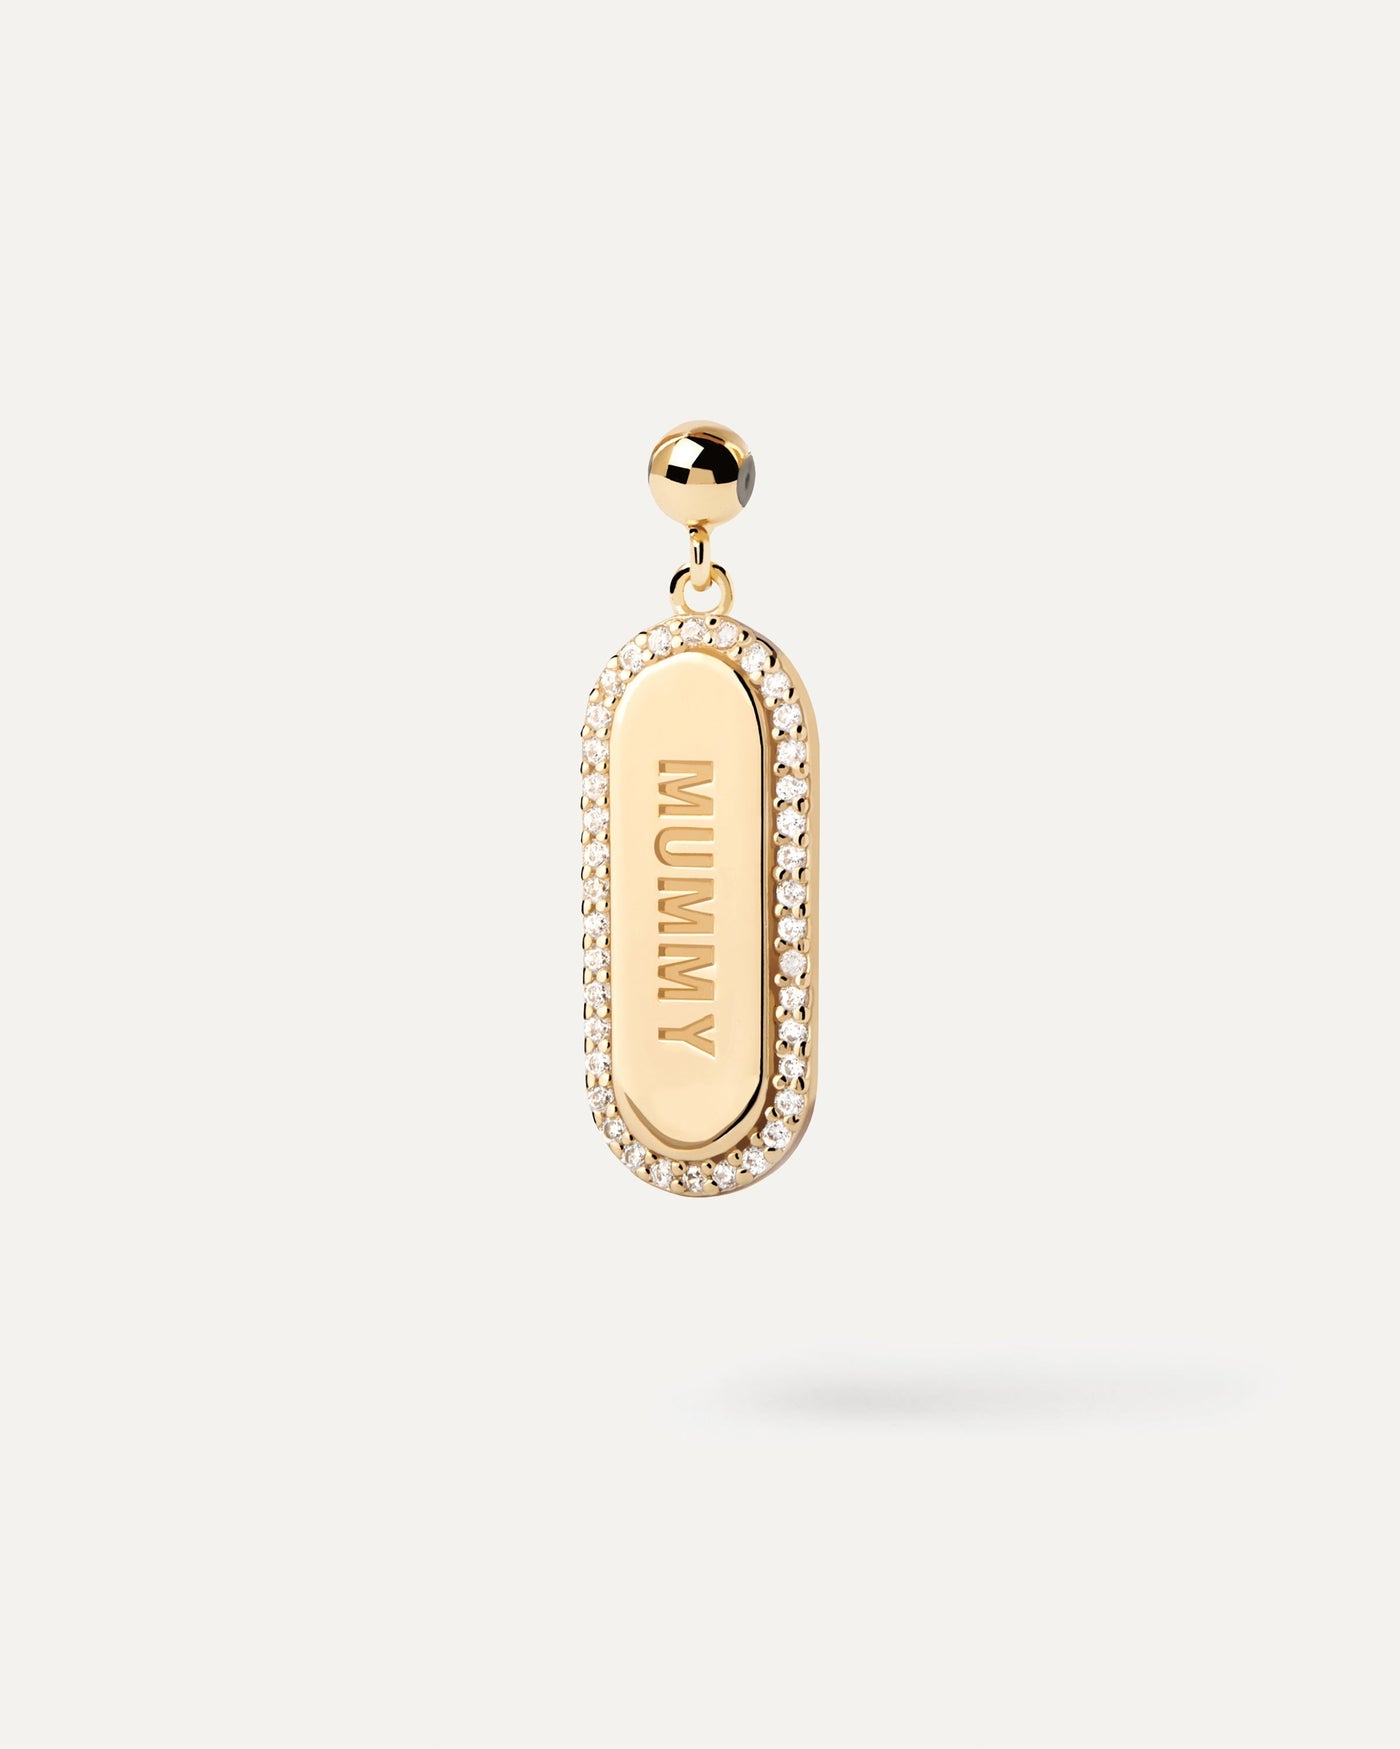 2023 Selection | Mummy Sparkly Charm. Get the latest arrival from PDPAOLA. Place your order safely and get this Best Seller. Free Shipping.